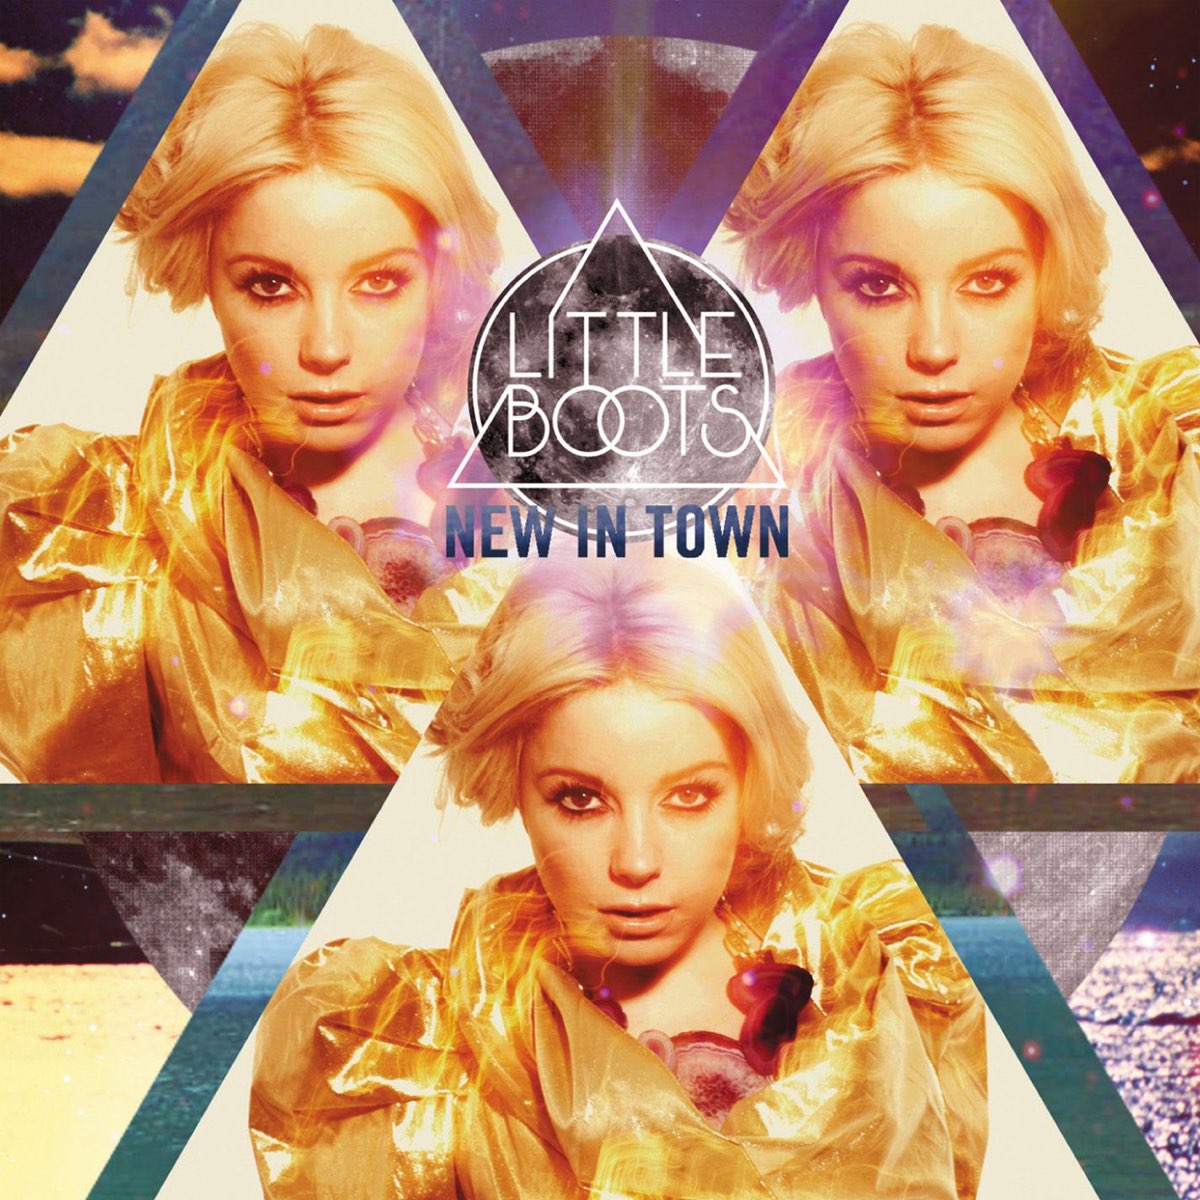 Little Boots New in Town cover artwork